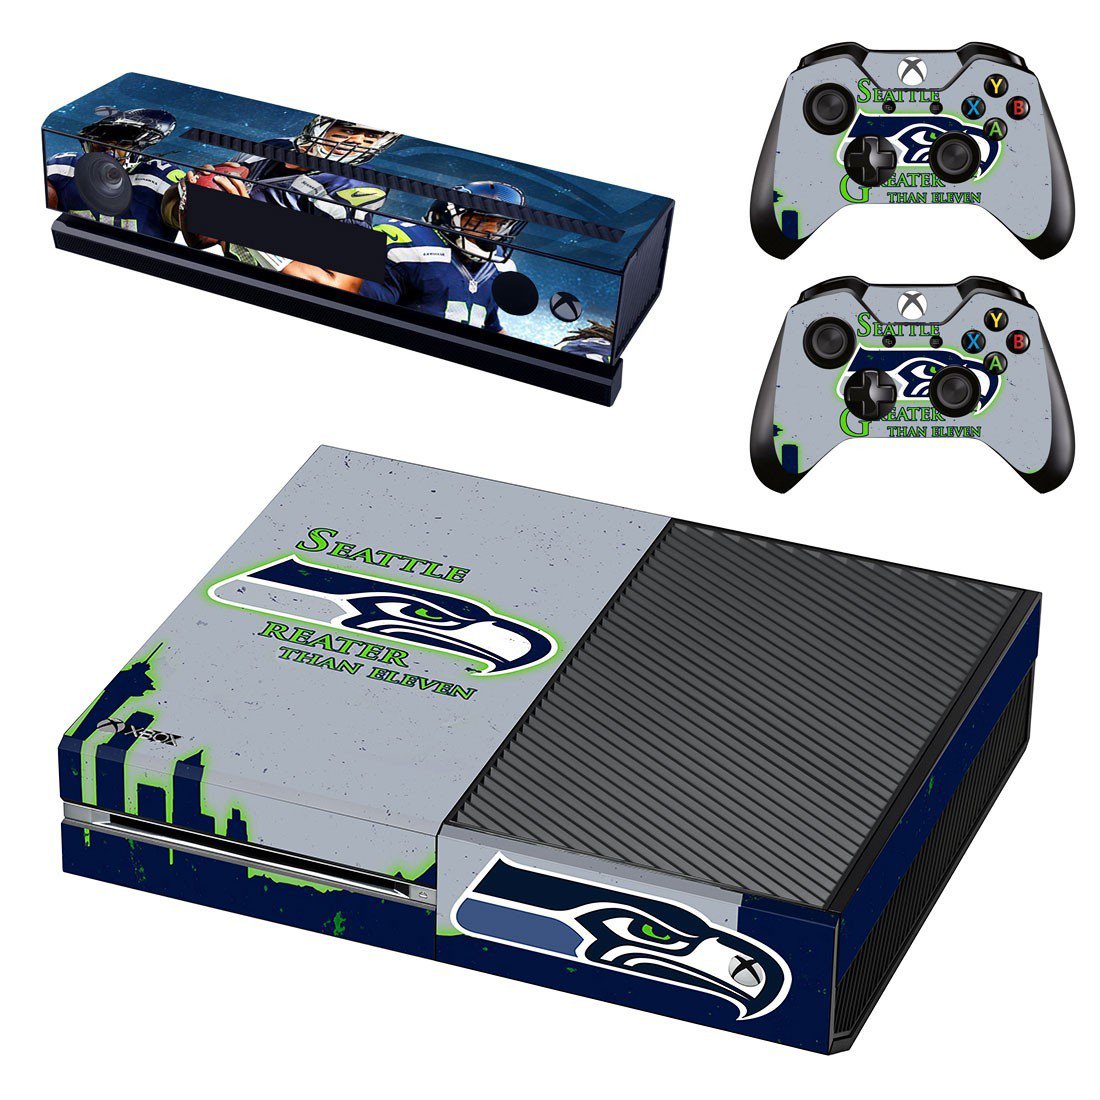 Seatle Rather Than Eleven Cover For Xbox One